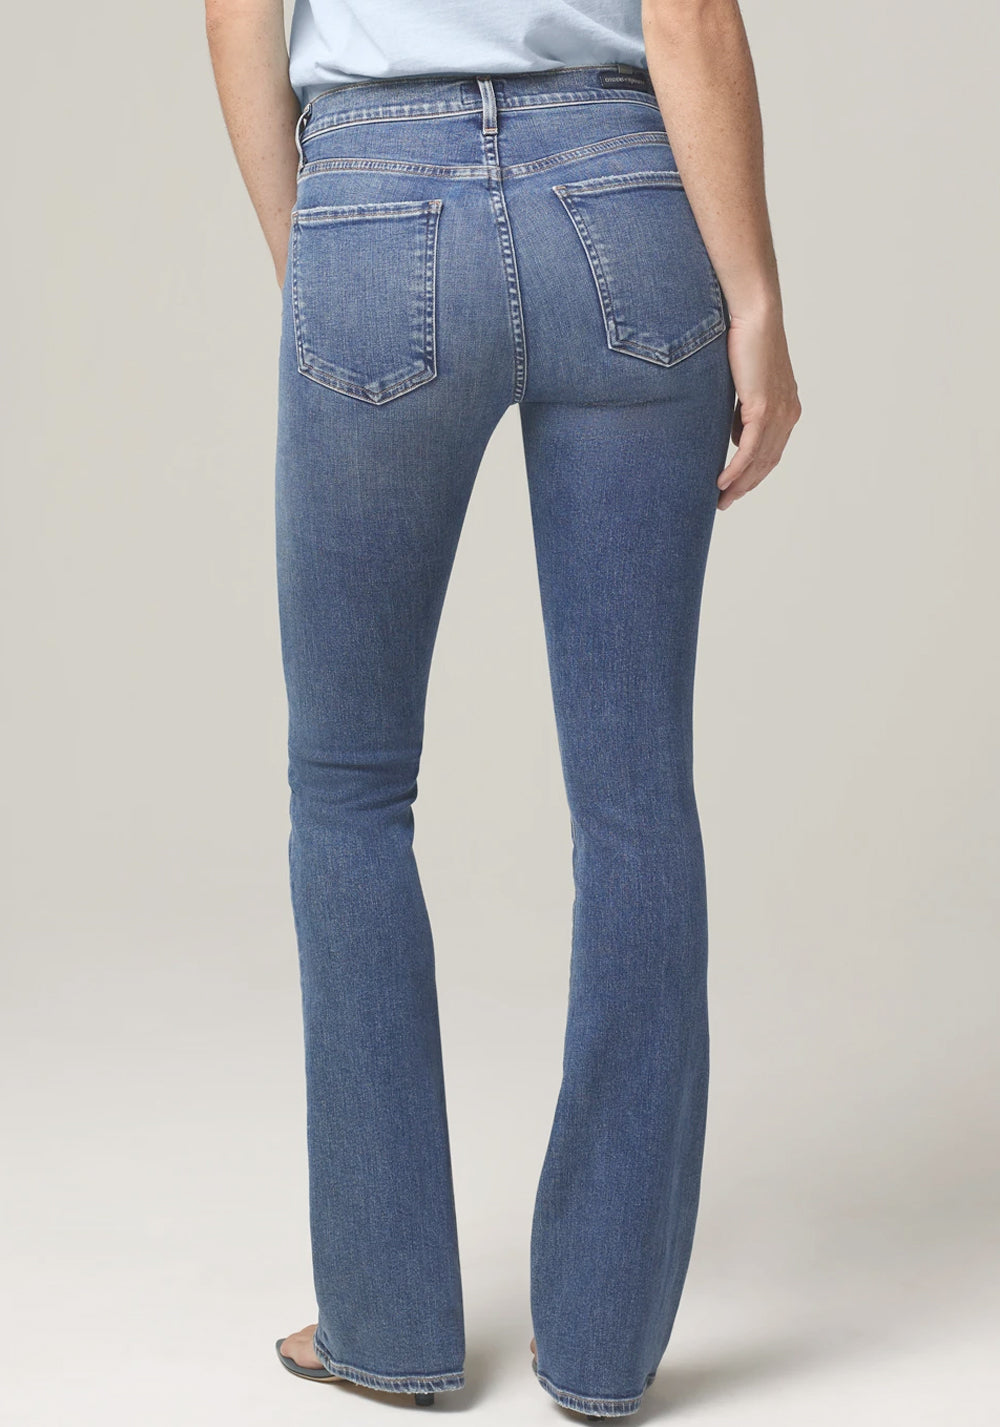 Citizens of Humanity - Emannuelle Slim Boot Jeans in Story